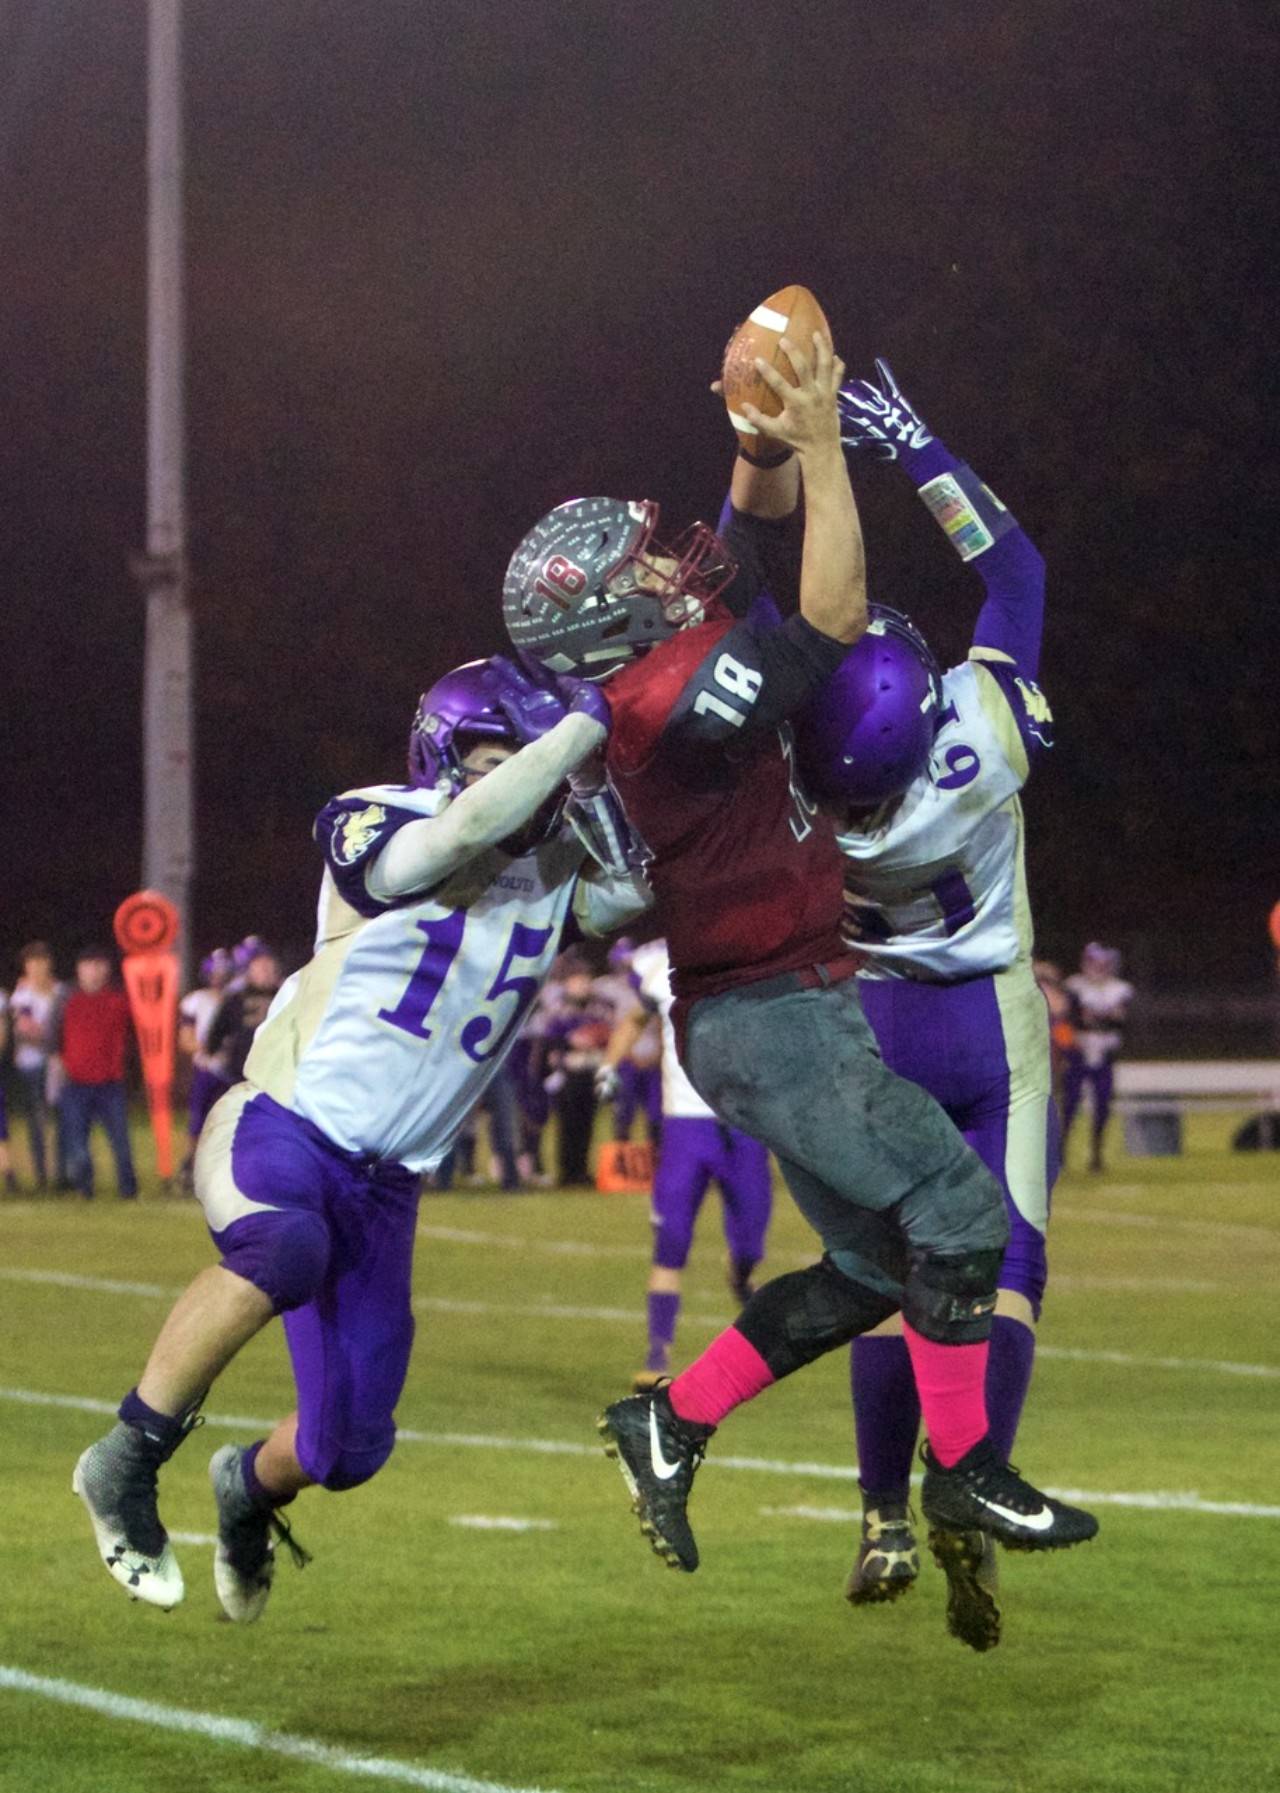 Hoquiam’s Payton Quintanilla rises to make a play on the ball against Sequim’s Taig Wiker (15) and Isaiah Cowan (61) on Friday at Olympic Stadium. (Photo by Patti Reynvaan)